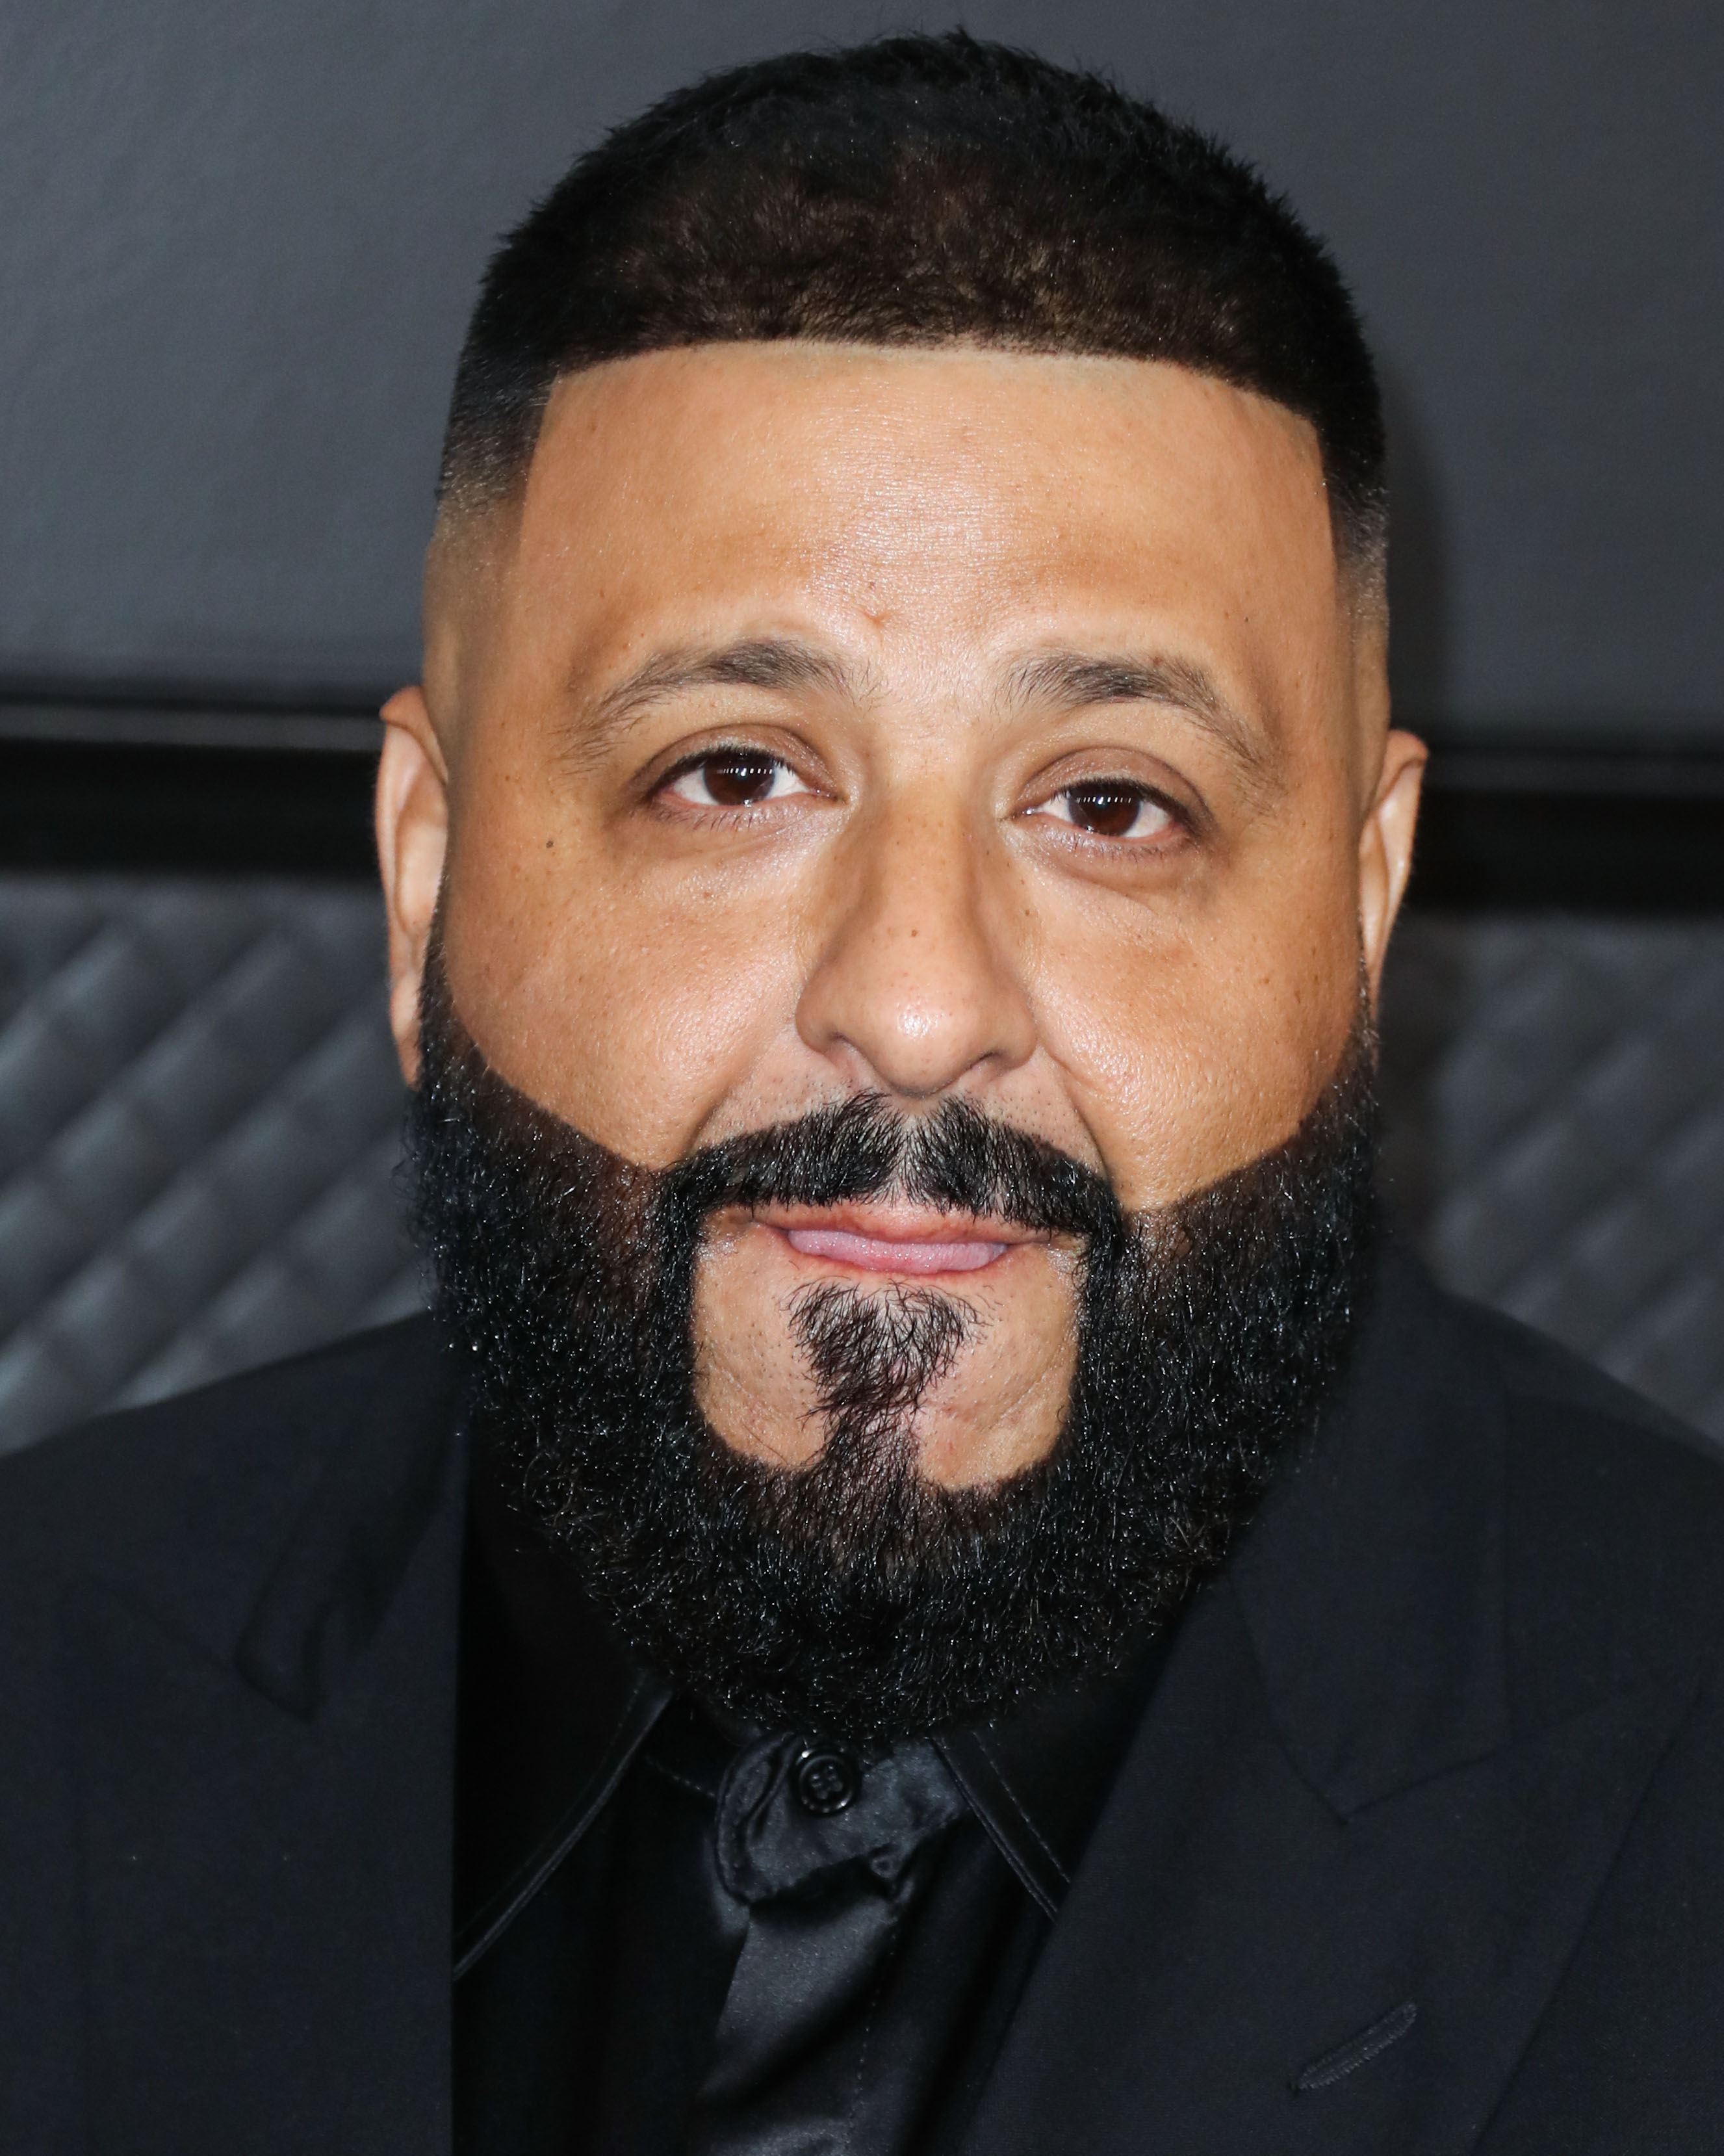 This Is How Desparately DJ Khaled Wants And Needs A Haircut 99.3105.